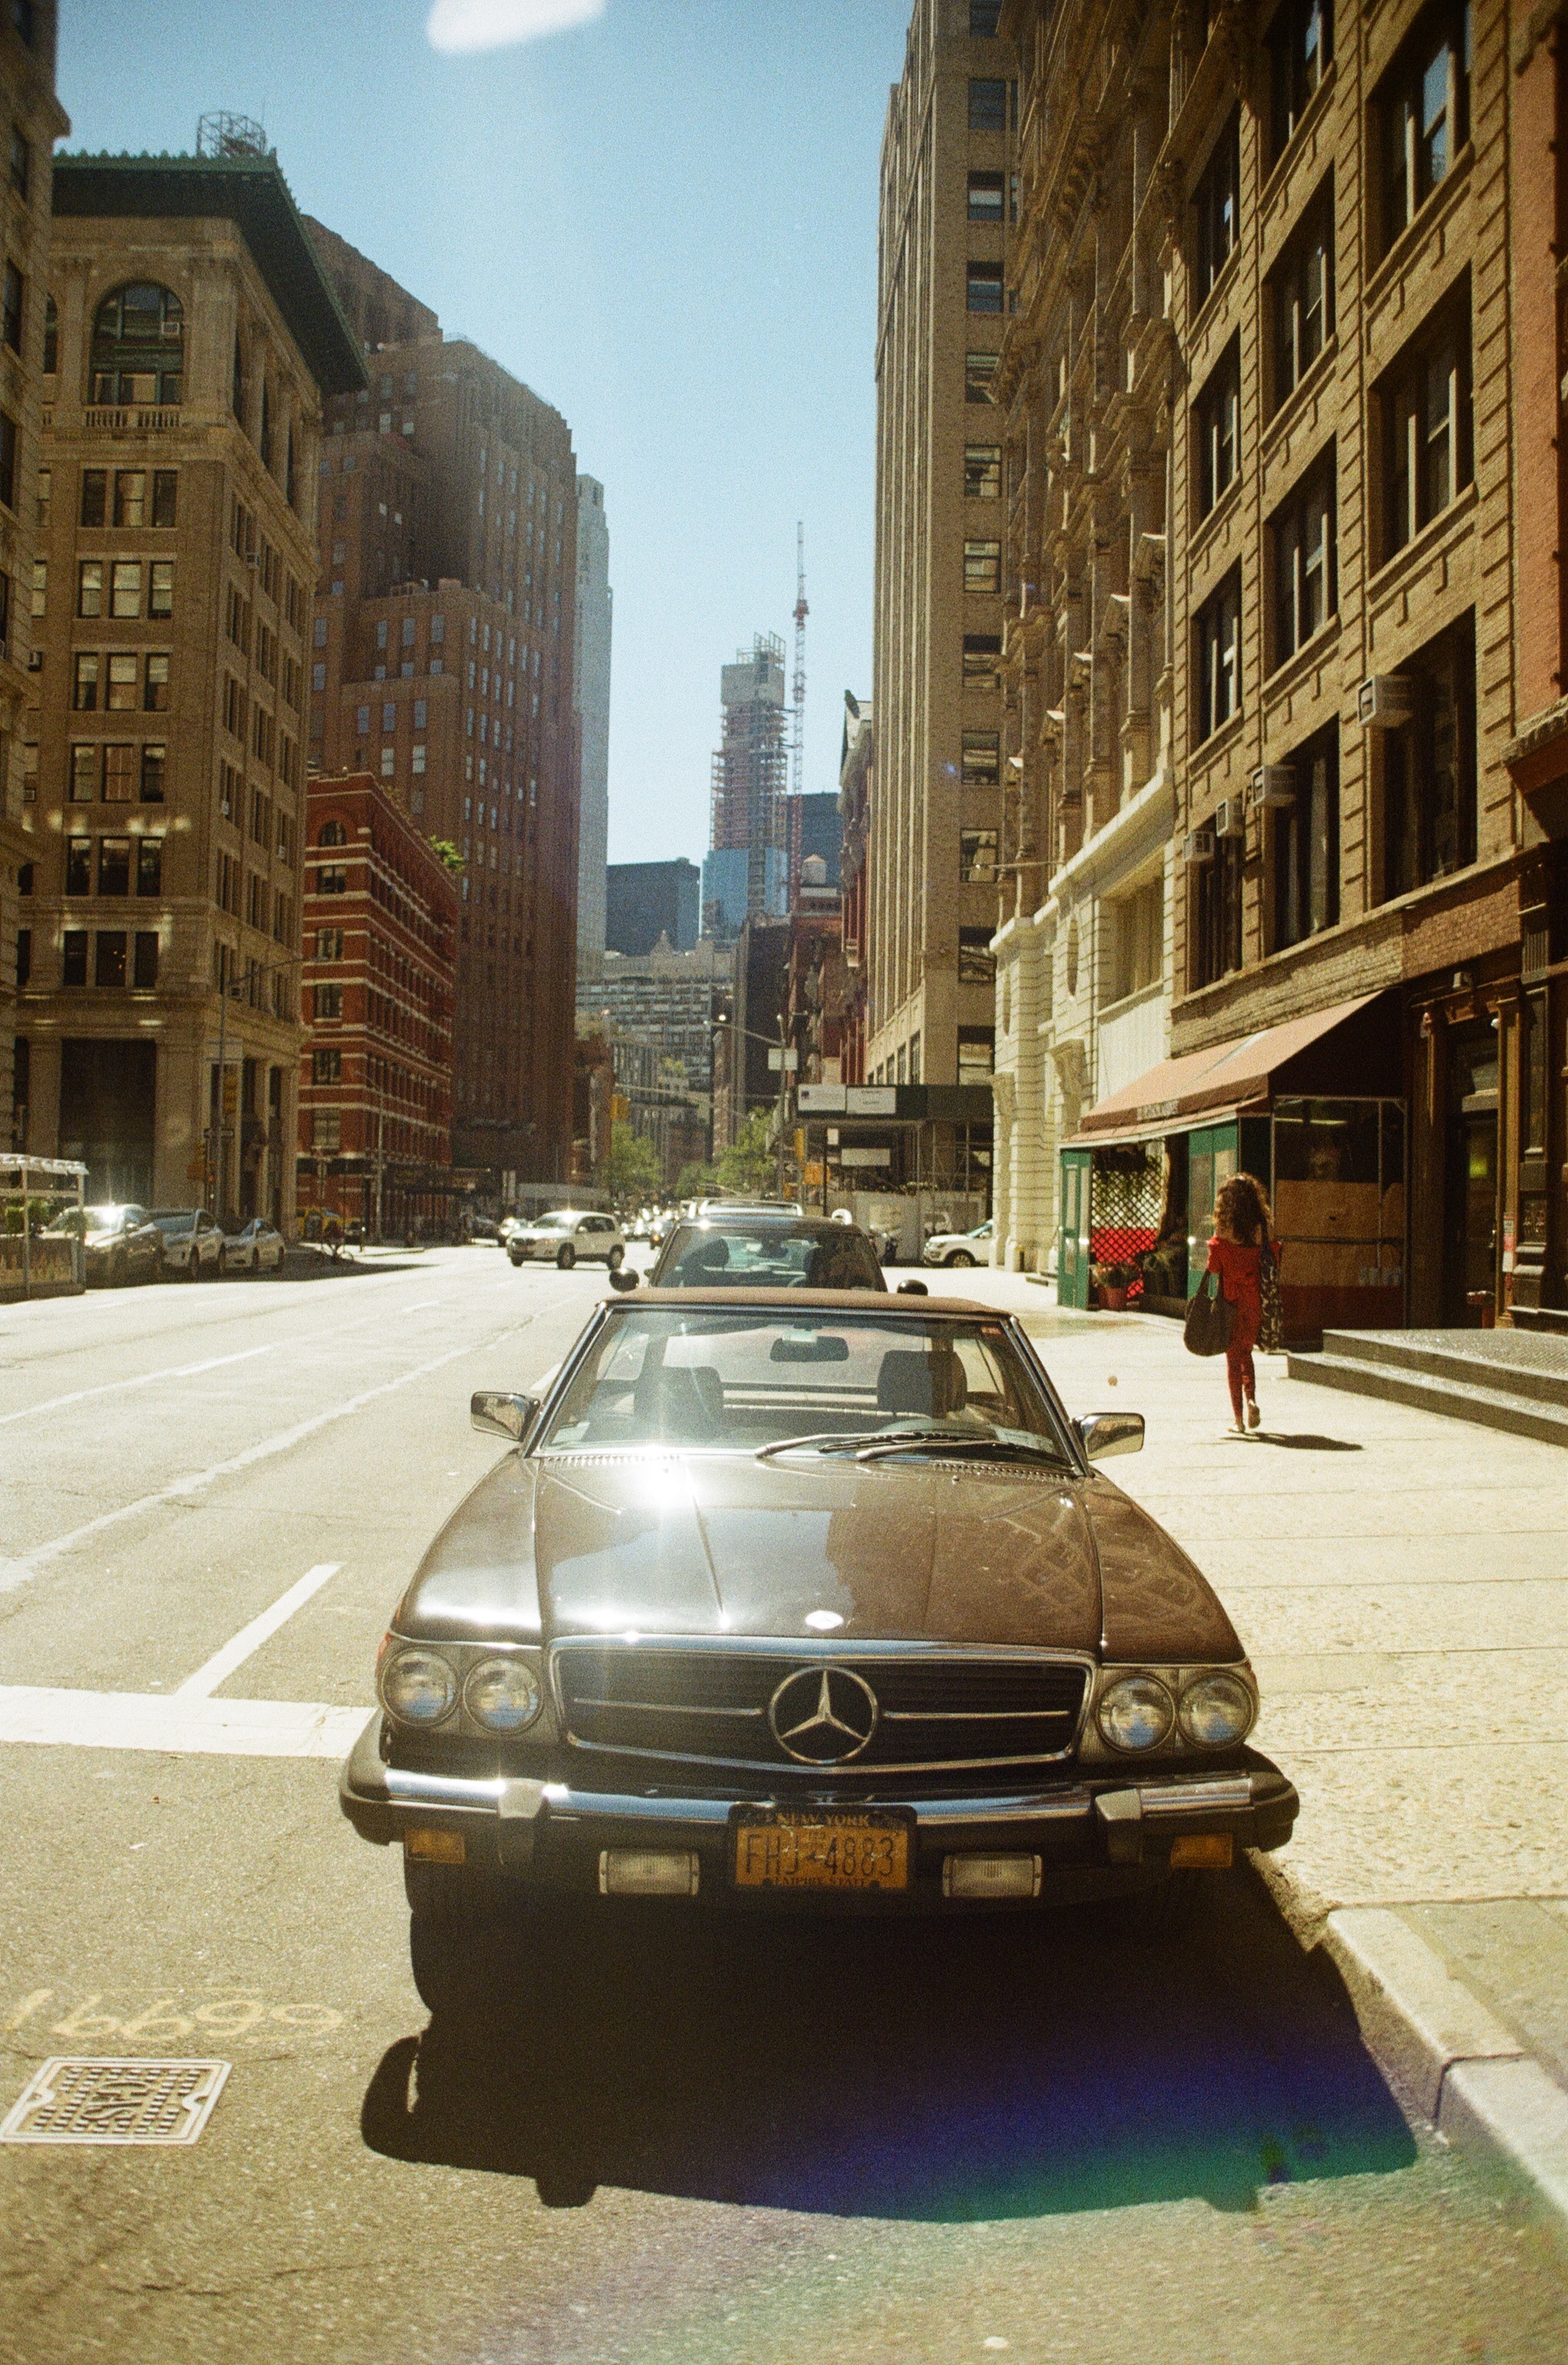 vintage mercedes car parked on a street in new york city shot on film